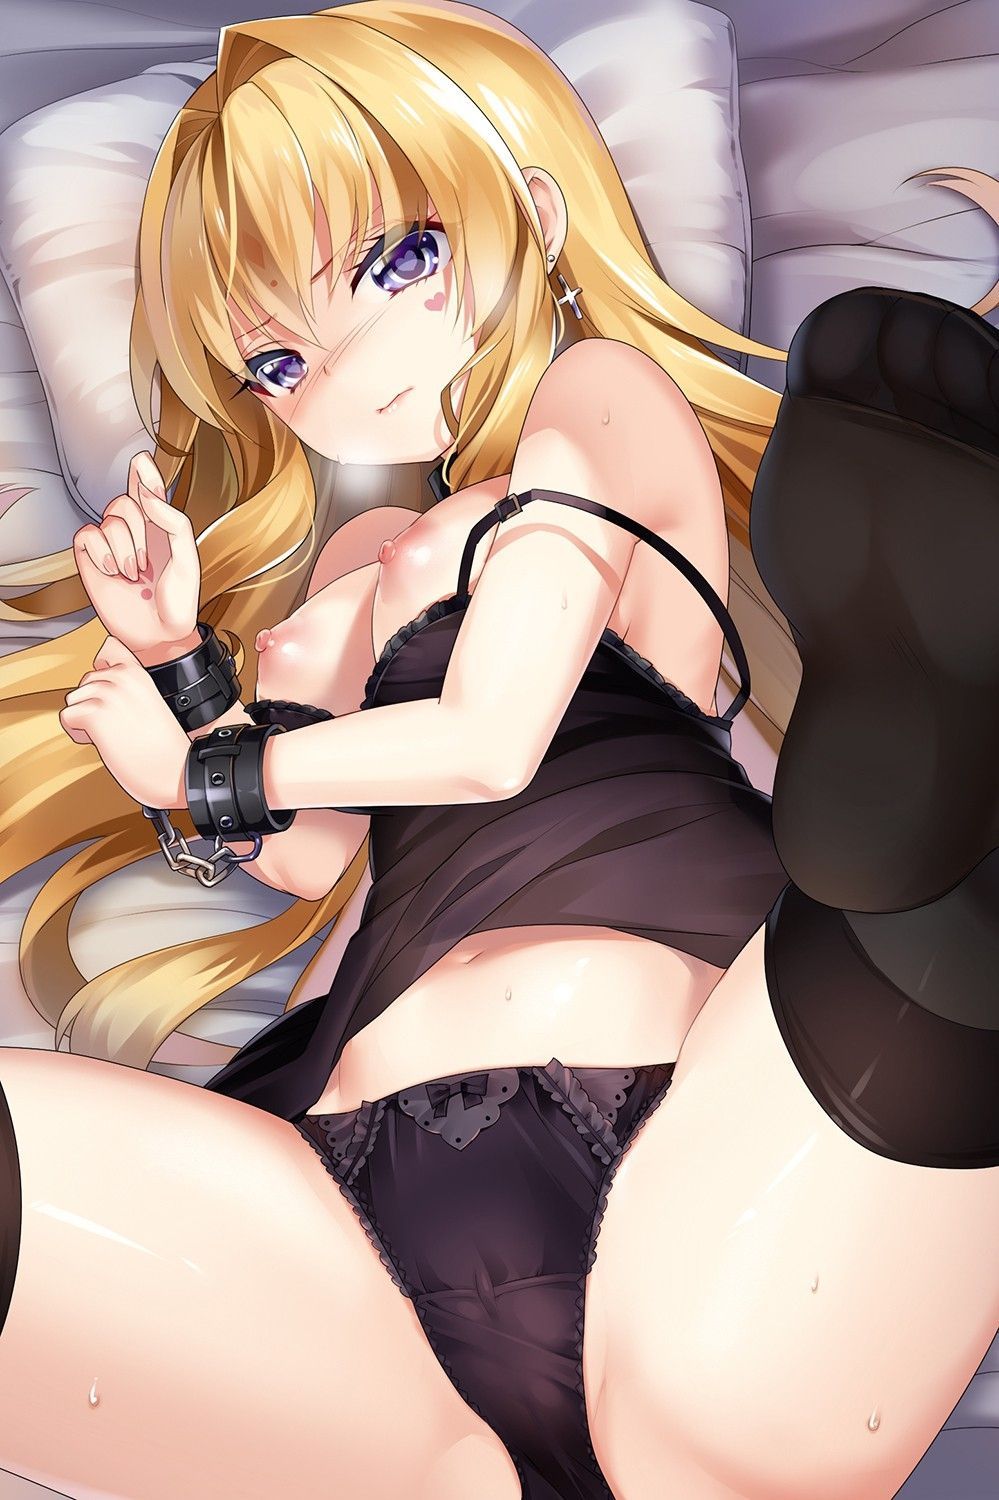 [Secondary ZIP] image of the thighhighs girl showing annoying thigh 19